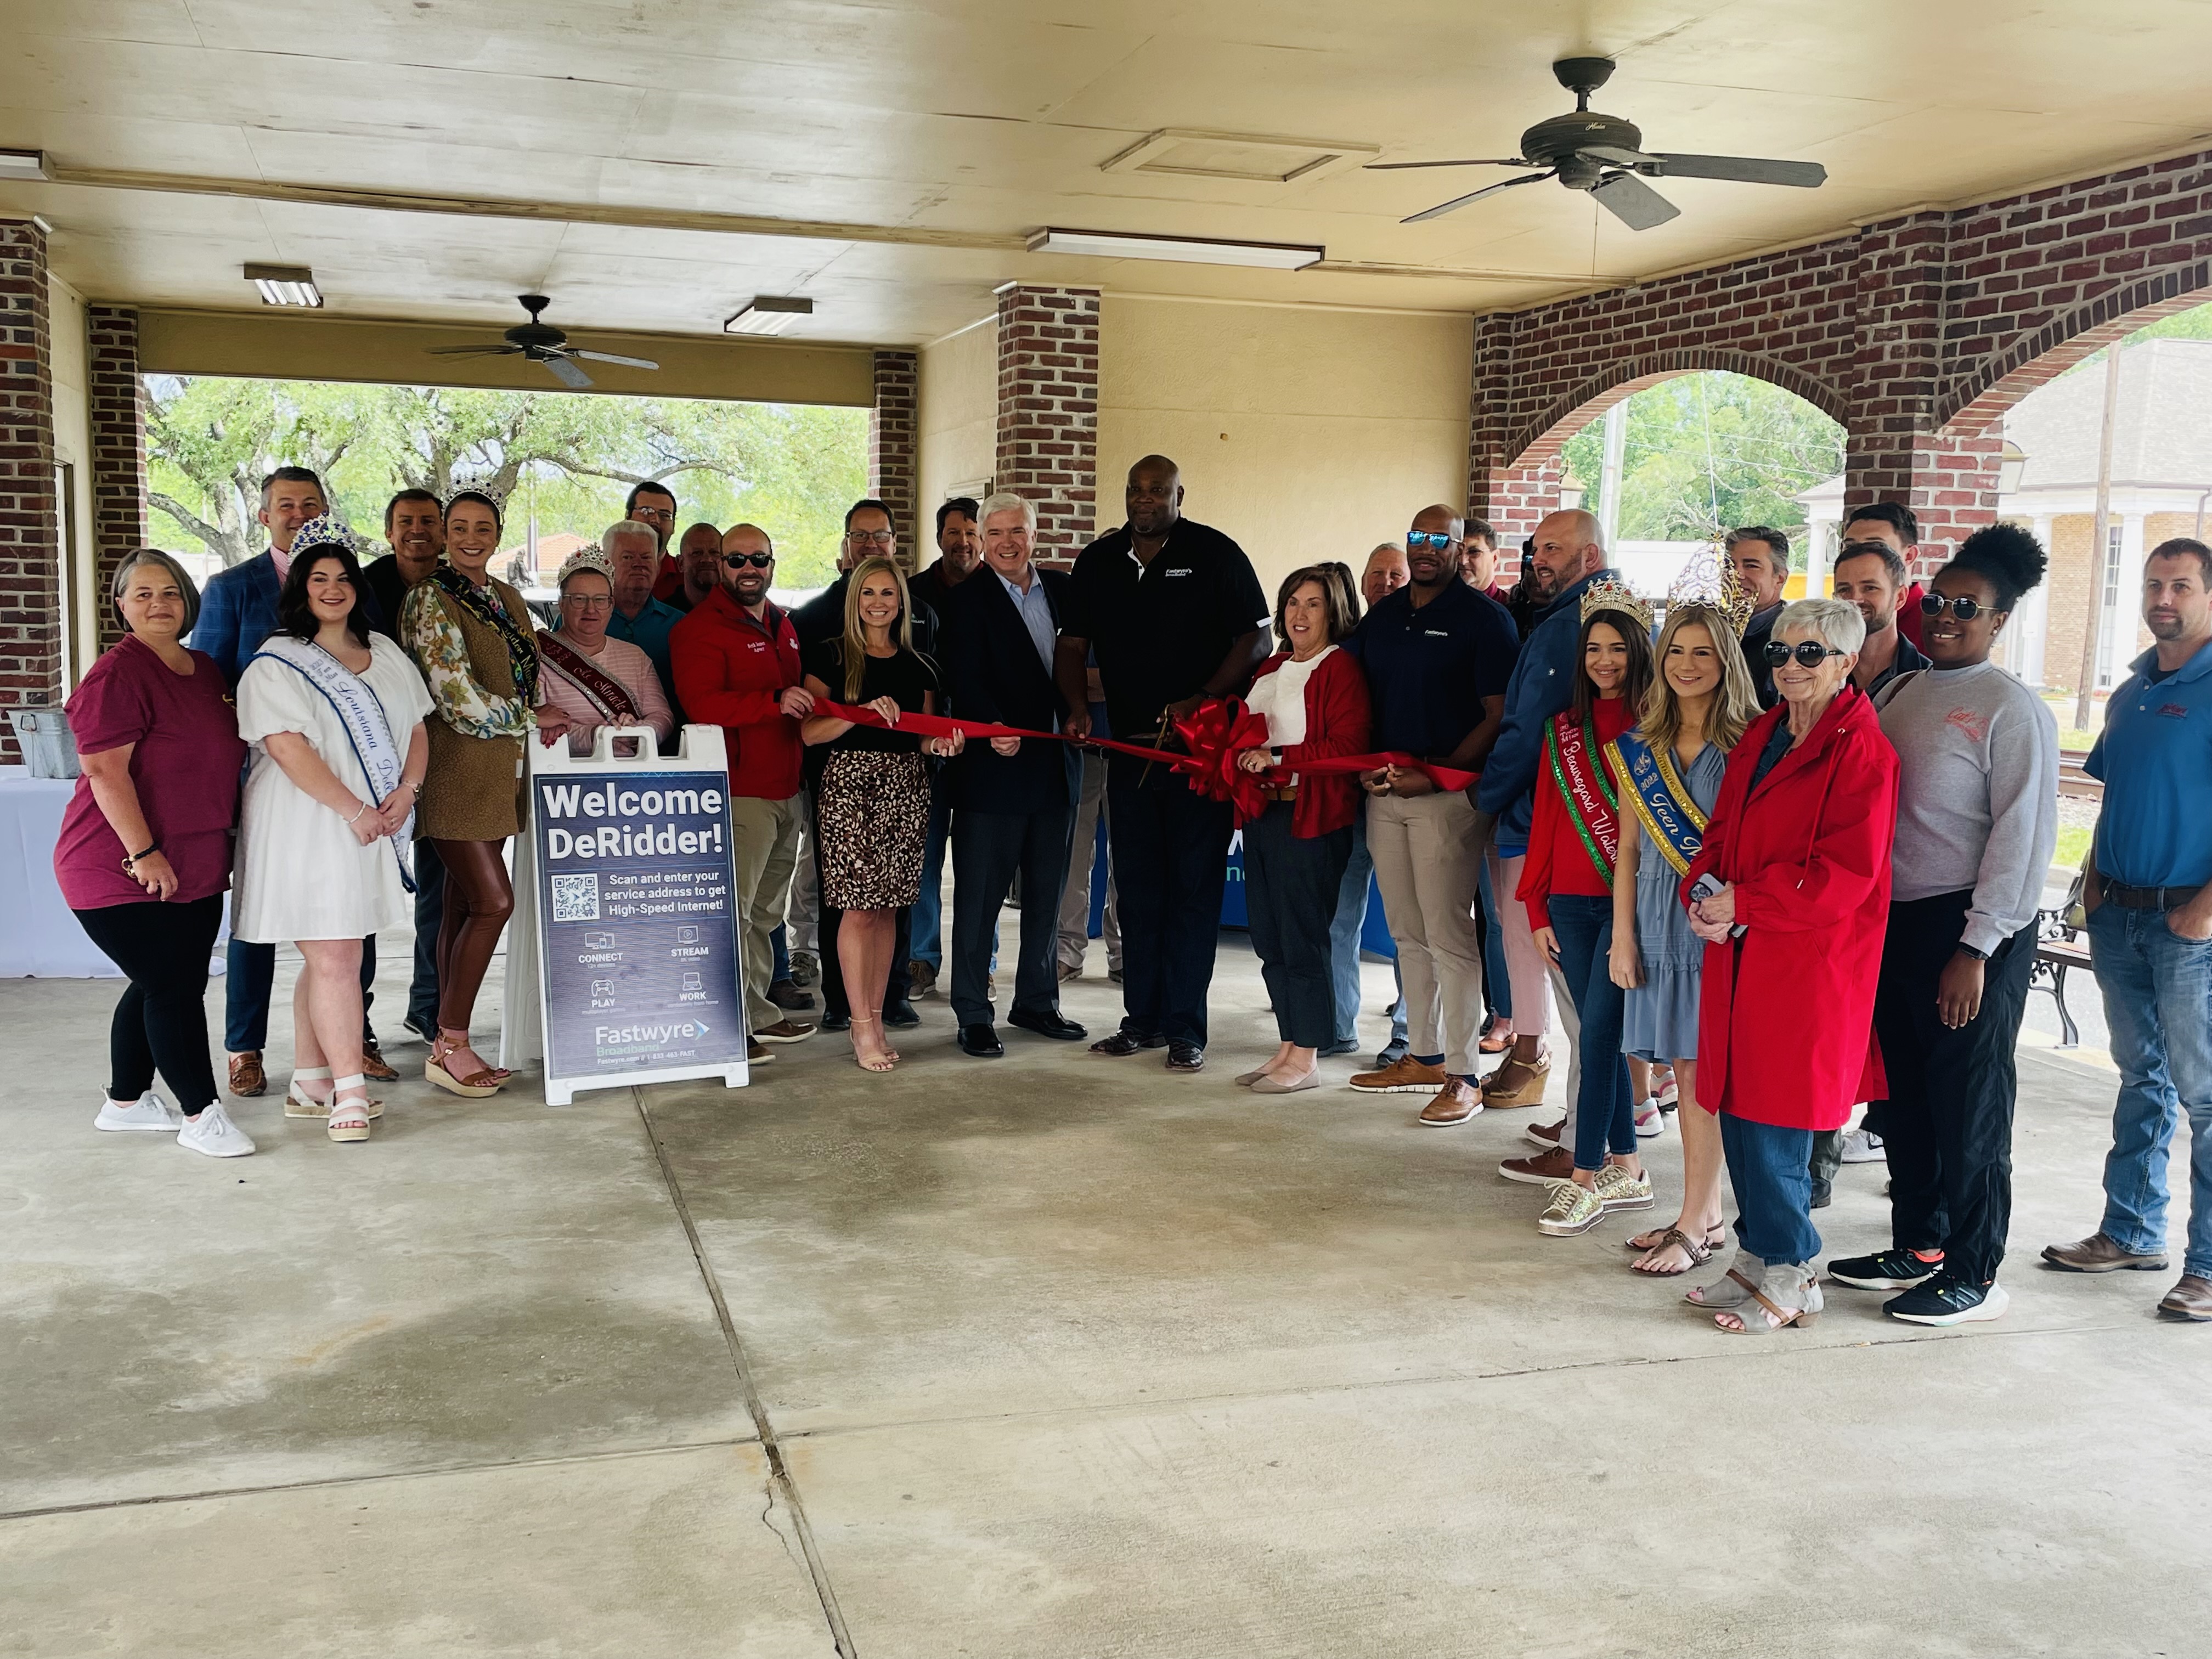 City of DeRidder Welcomes Fastwyre Broadband with April 24 Ribbon Cutting